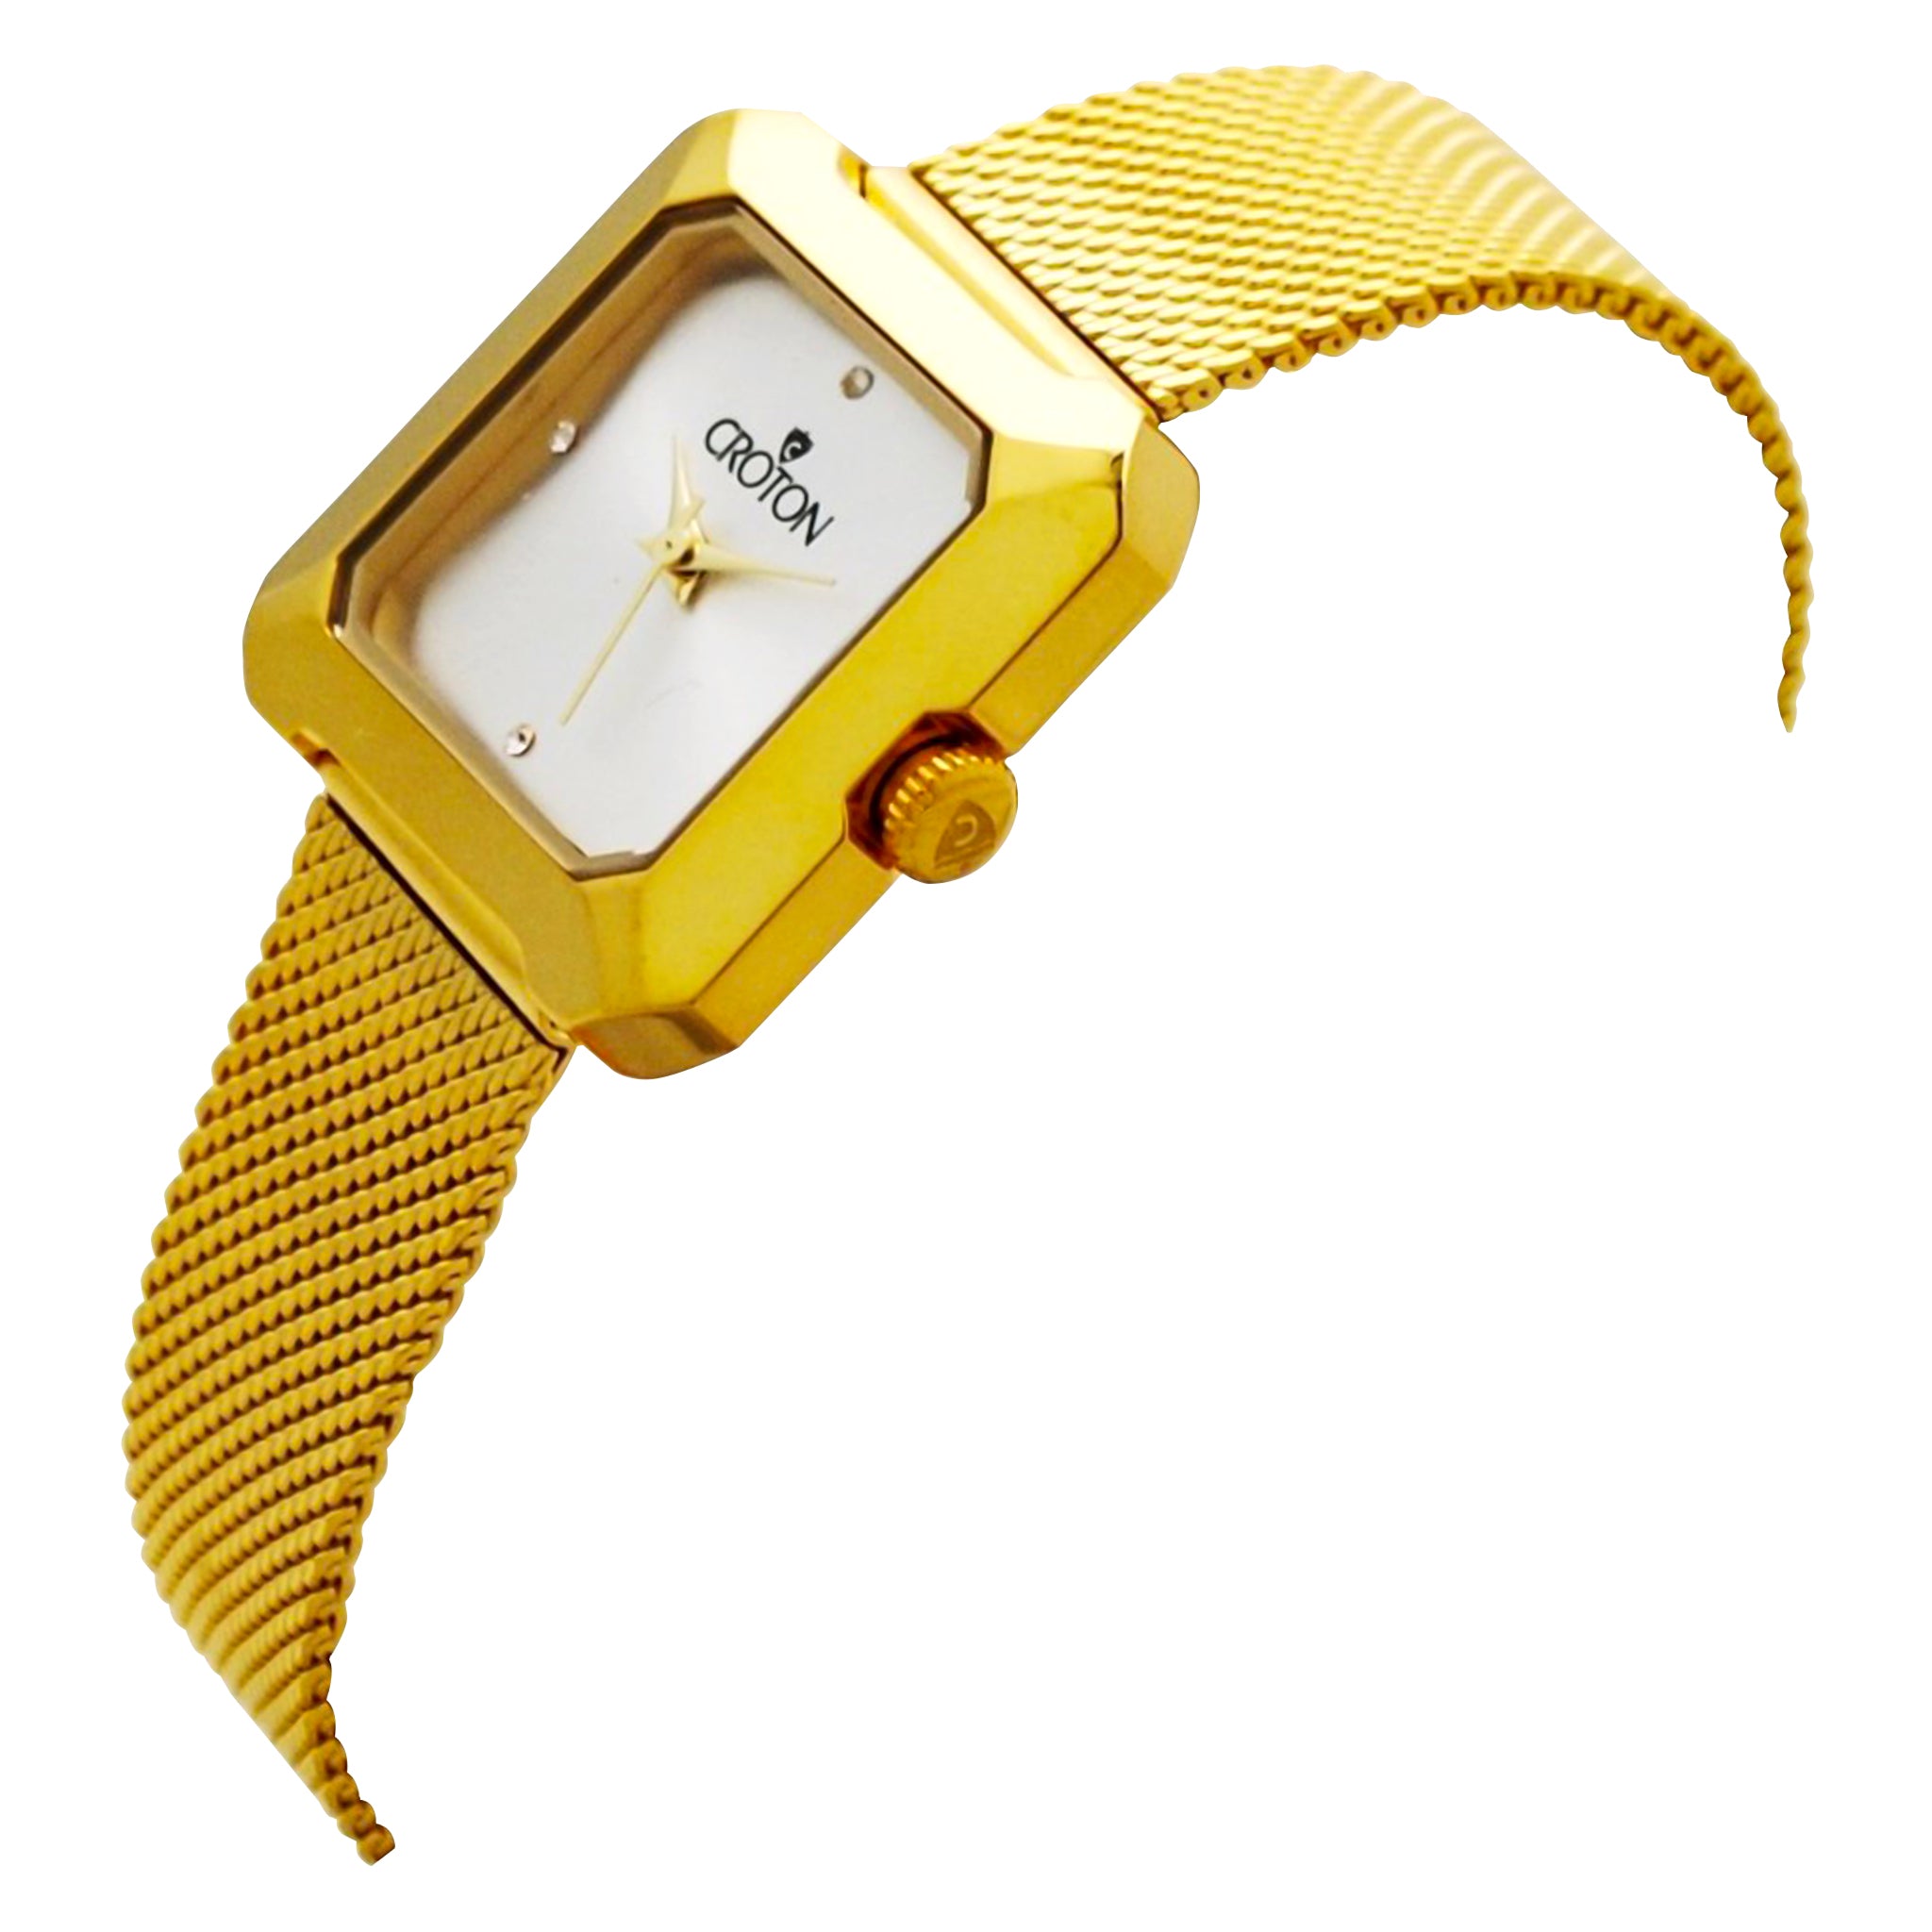 Ladies All Stainless Steel Goldtone Mesh Bracelet Watch with Silver Dial